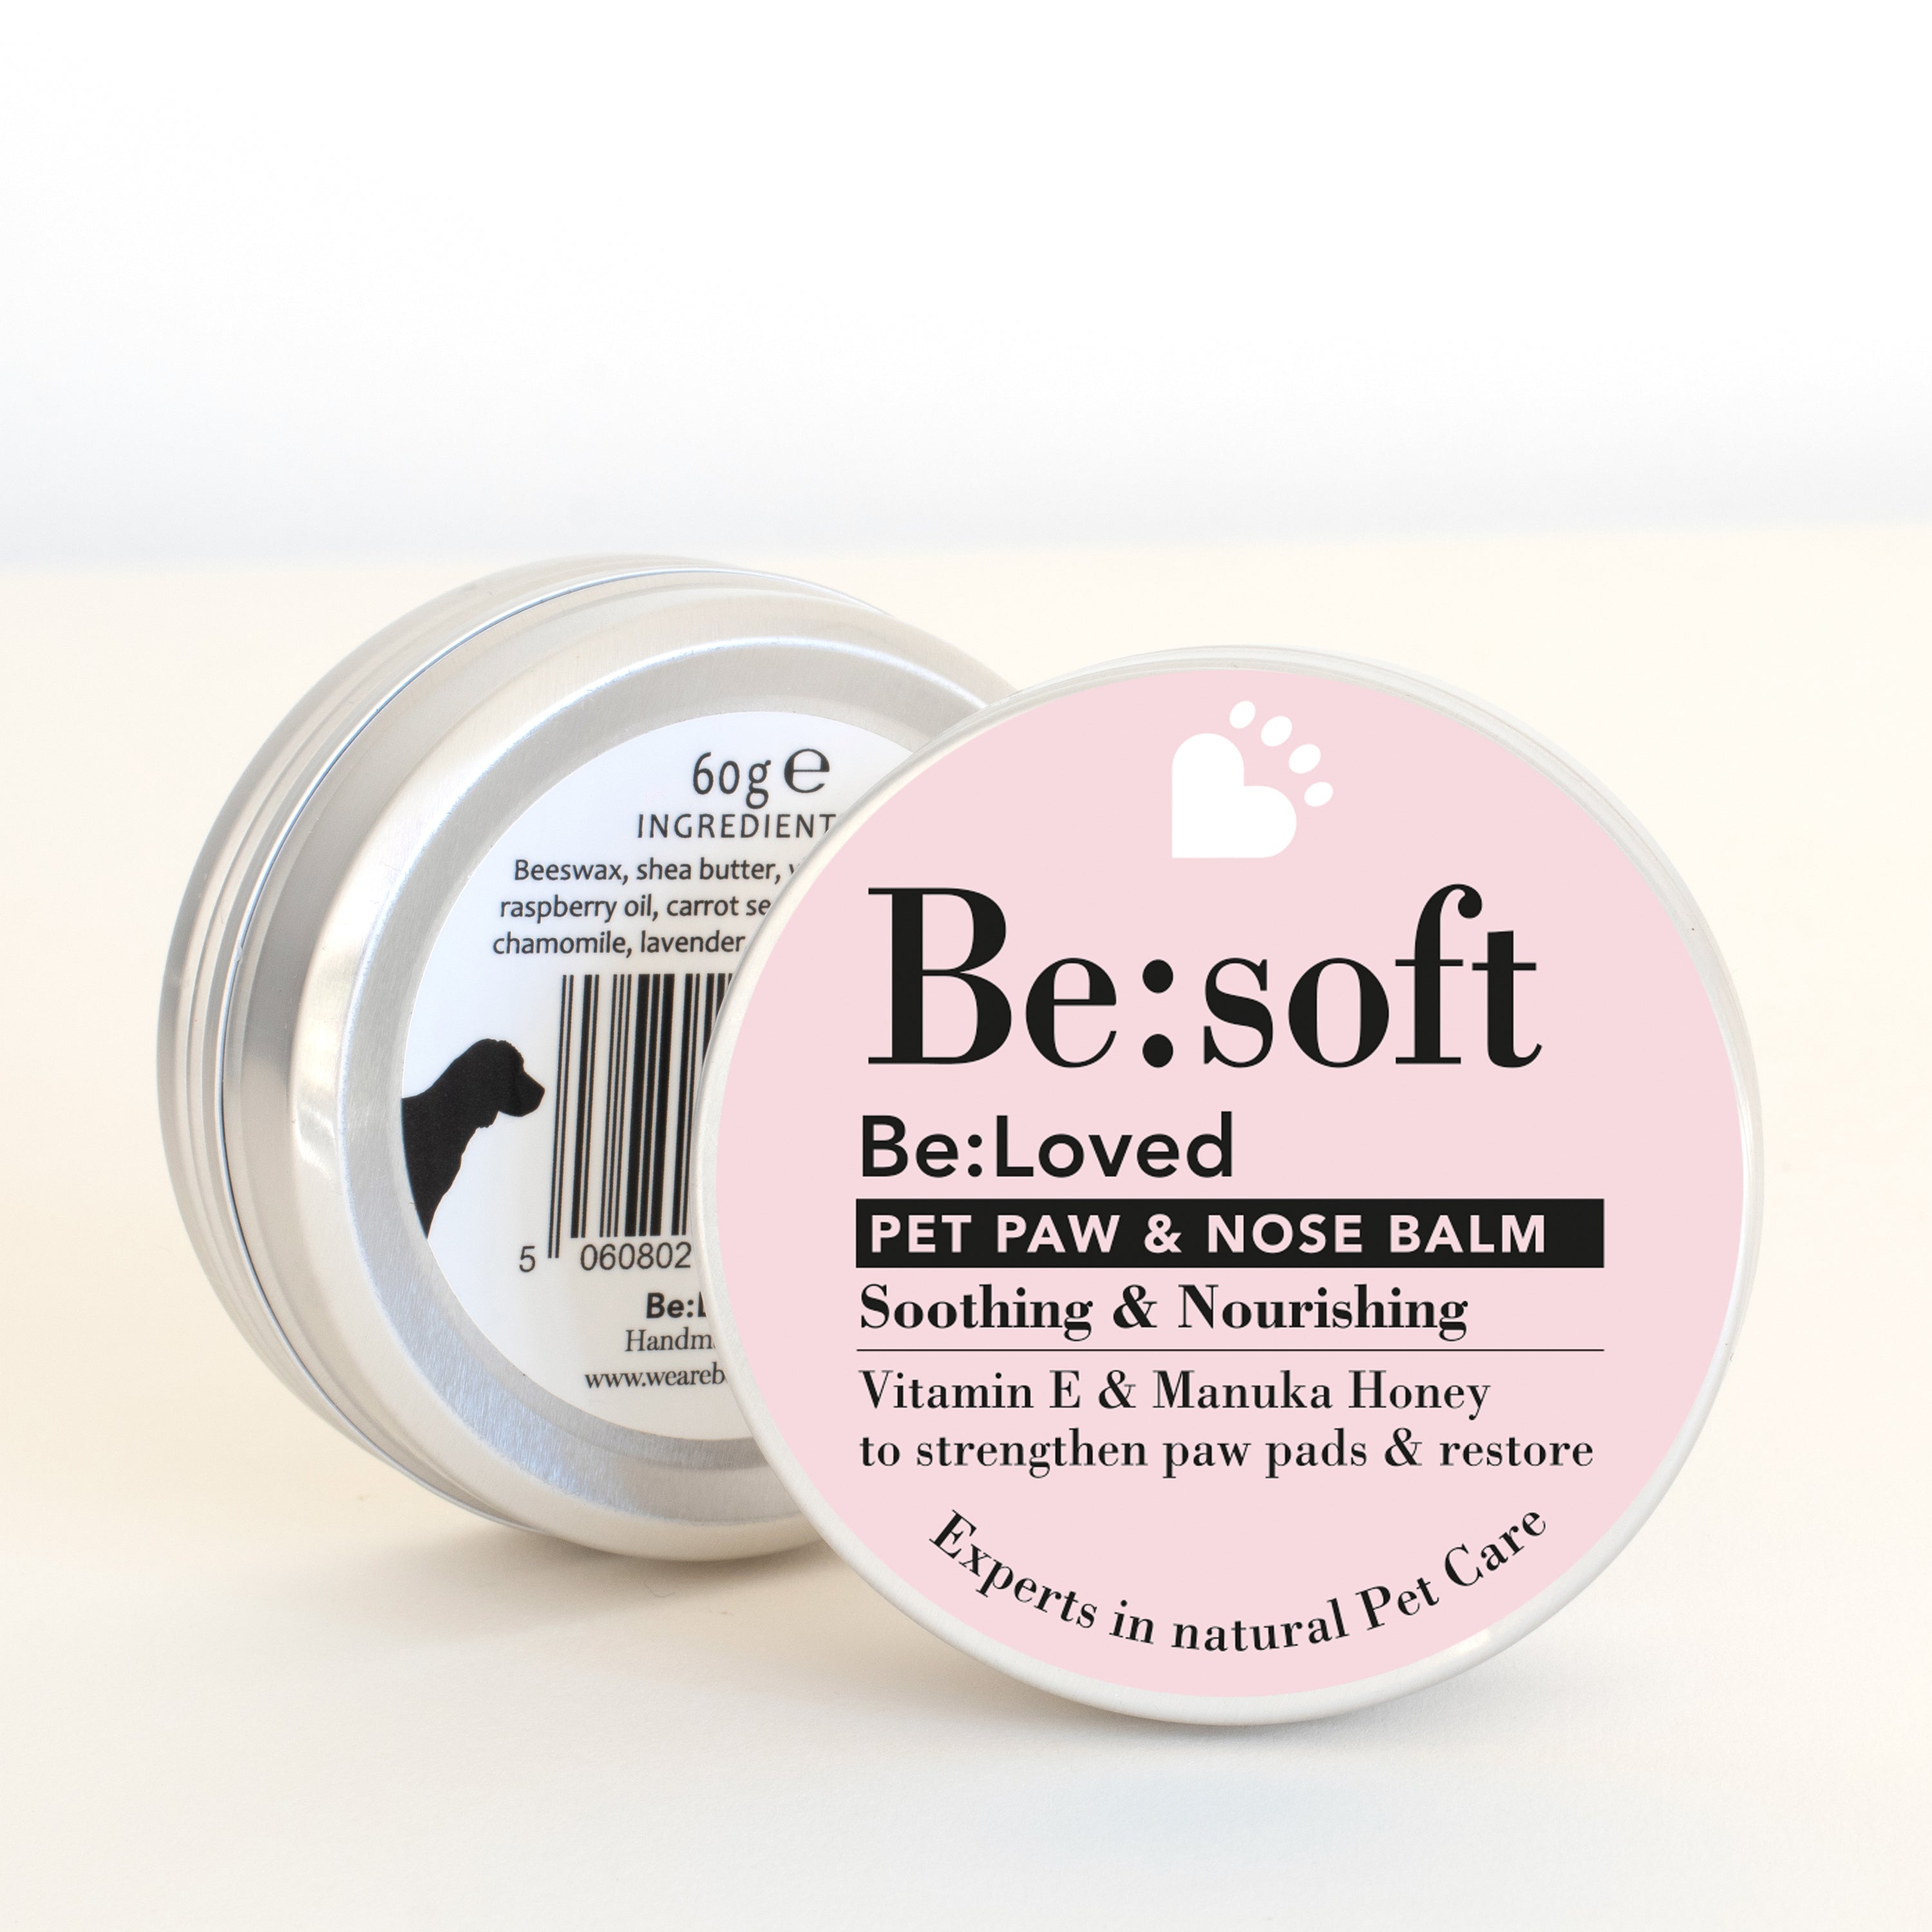 Be:soft pet paw and nose balm packaging from the front and back.